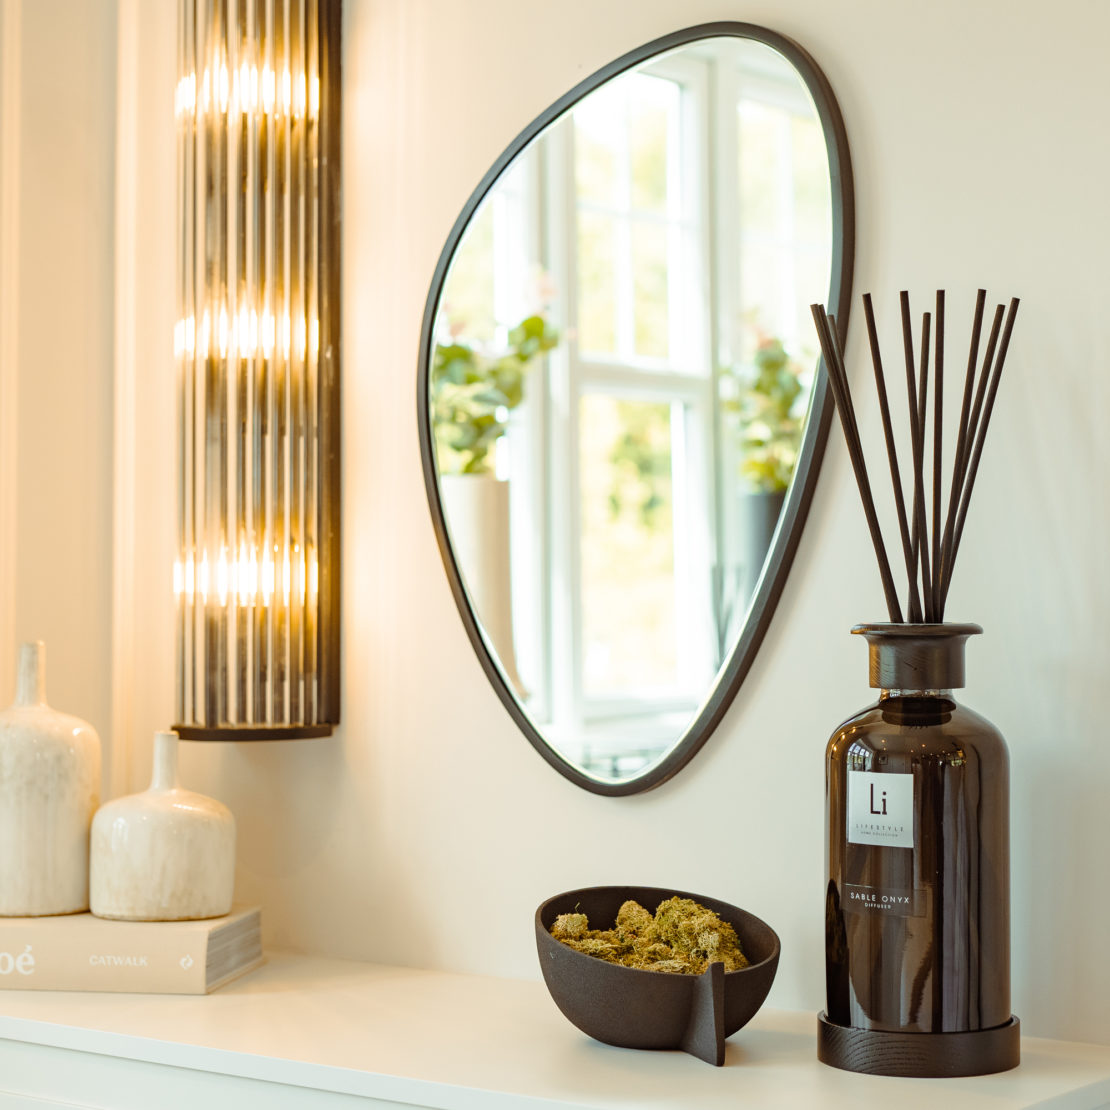 luxury home fragrance - sable onyx diffuser by juliettes interiors